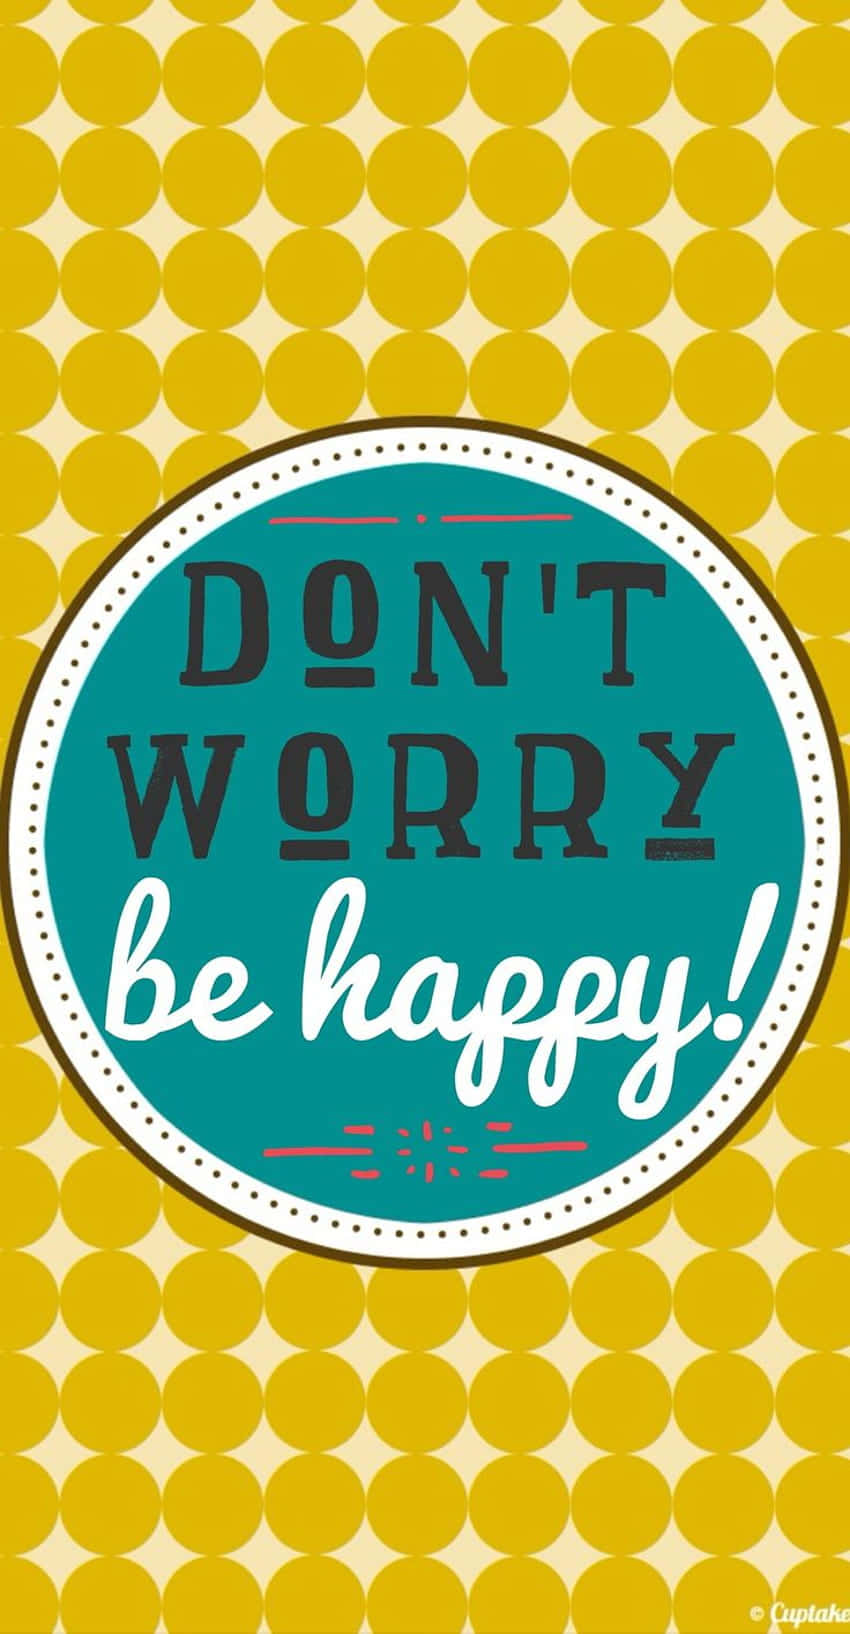 "Don't Worry, Be Happy!" Wallpaper